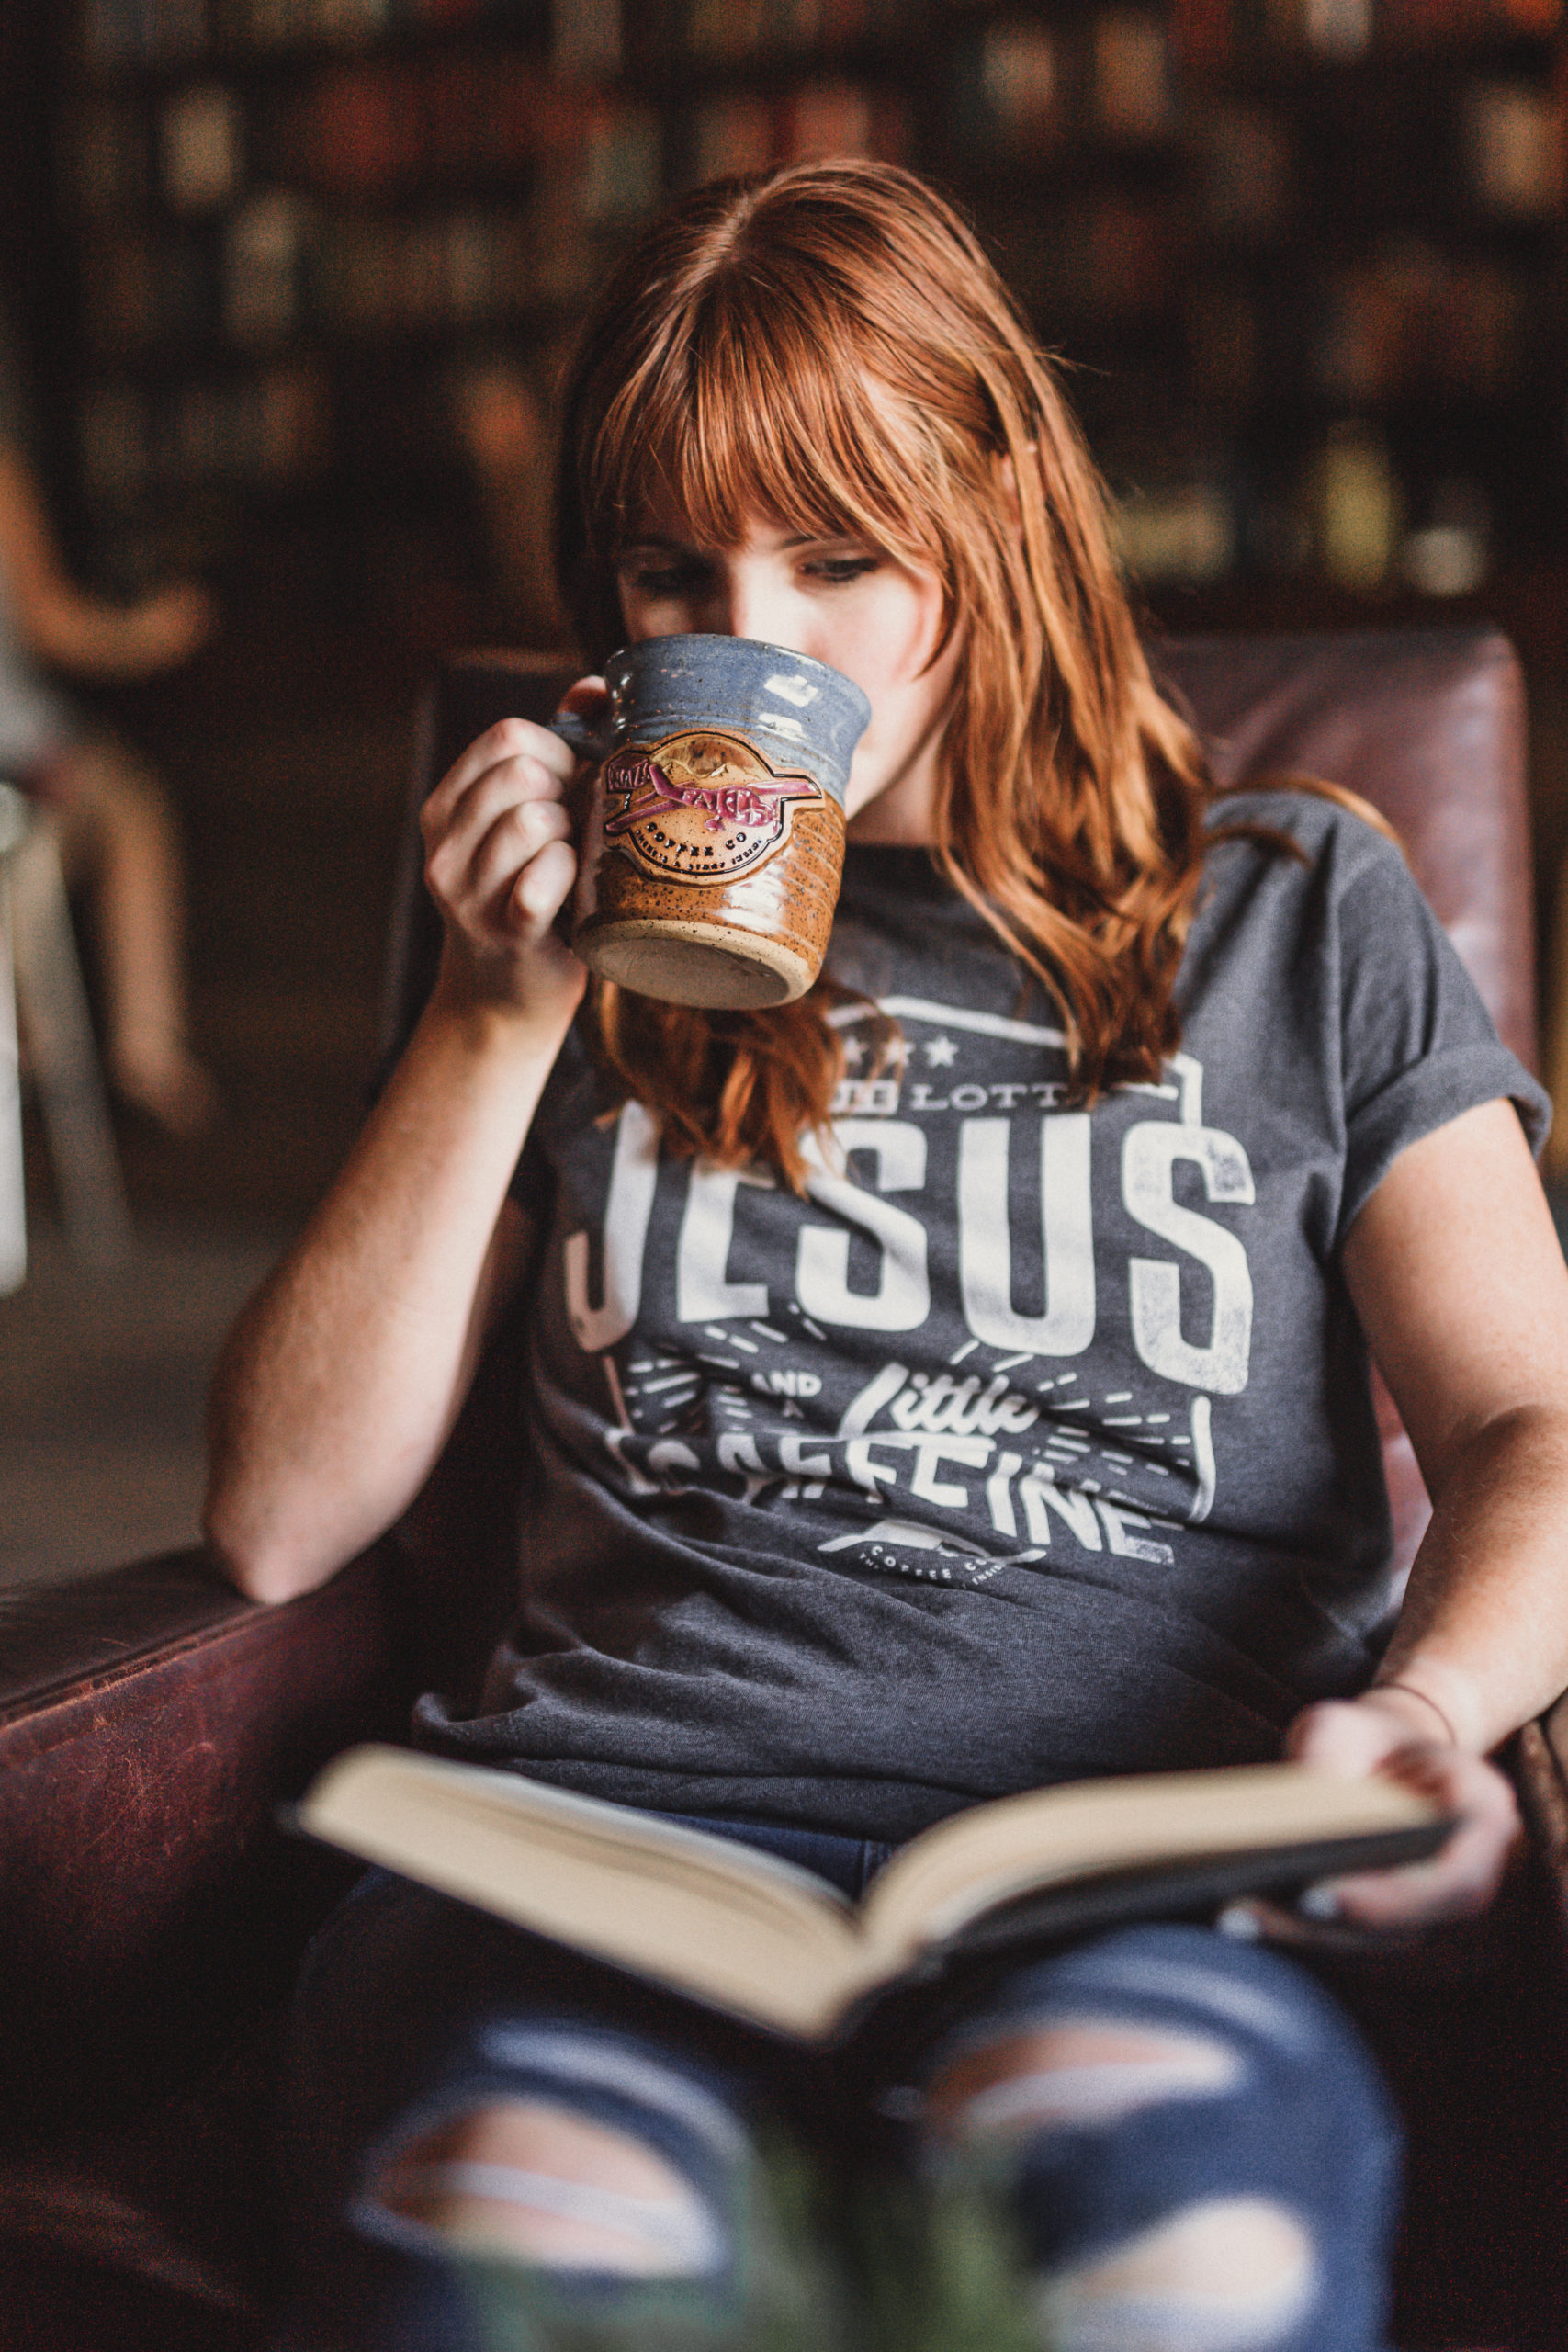 Woman wearing a gray t shirt that says A Whole Lotta Jesus and a Little Caffeine from Crazy Faith drinking some coffee from a brown and gray coffee cup and reading a book